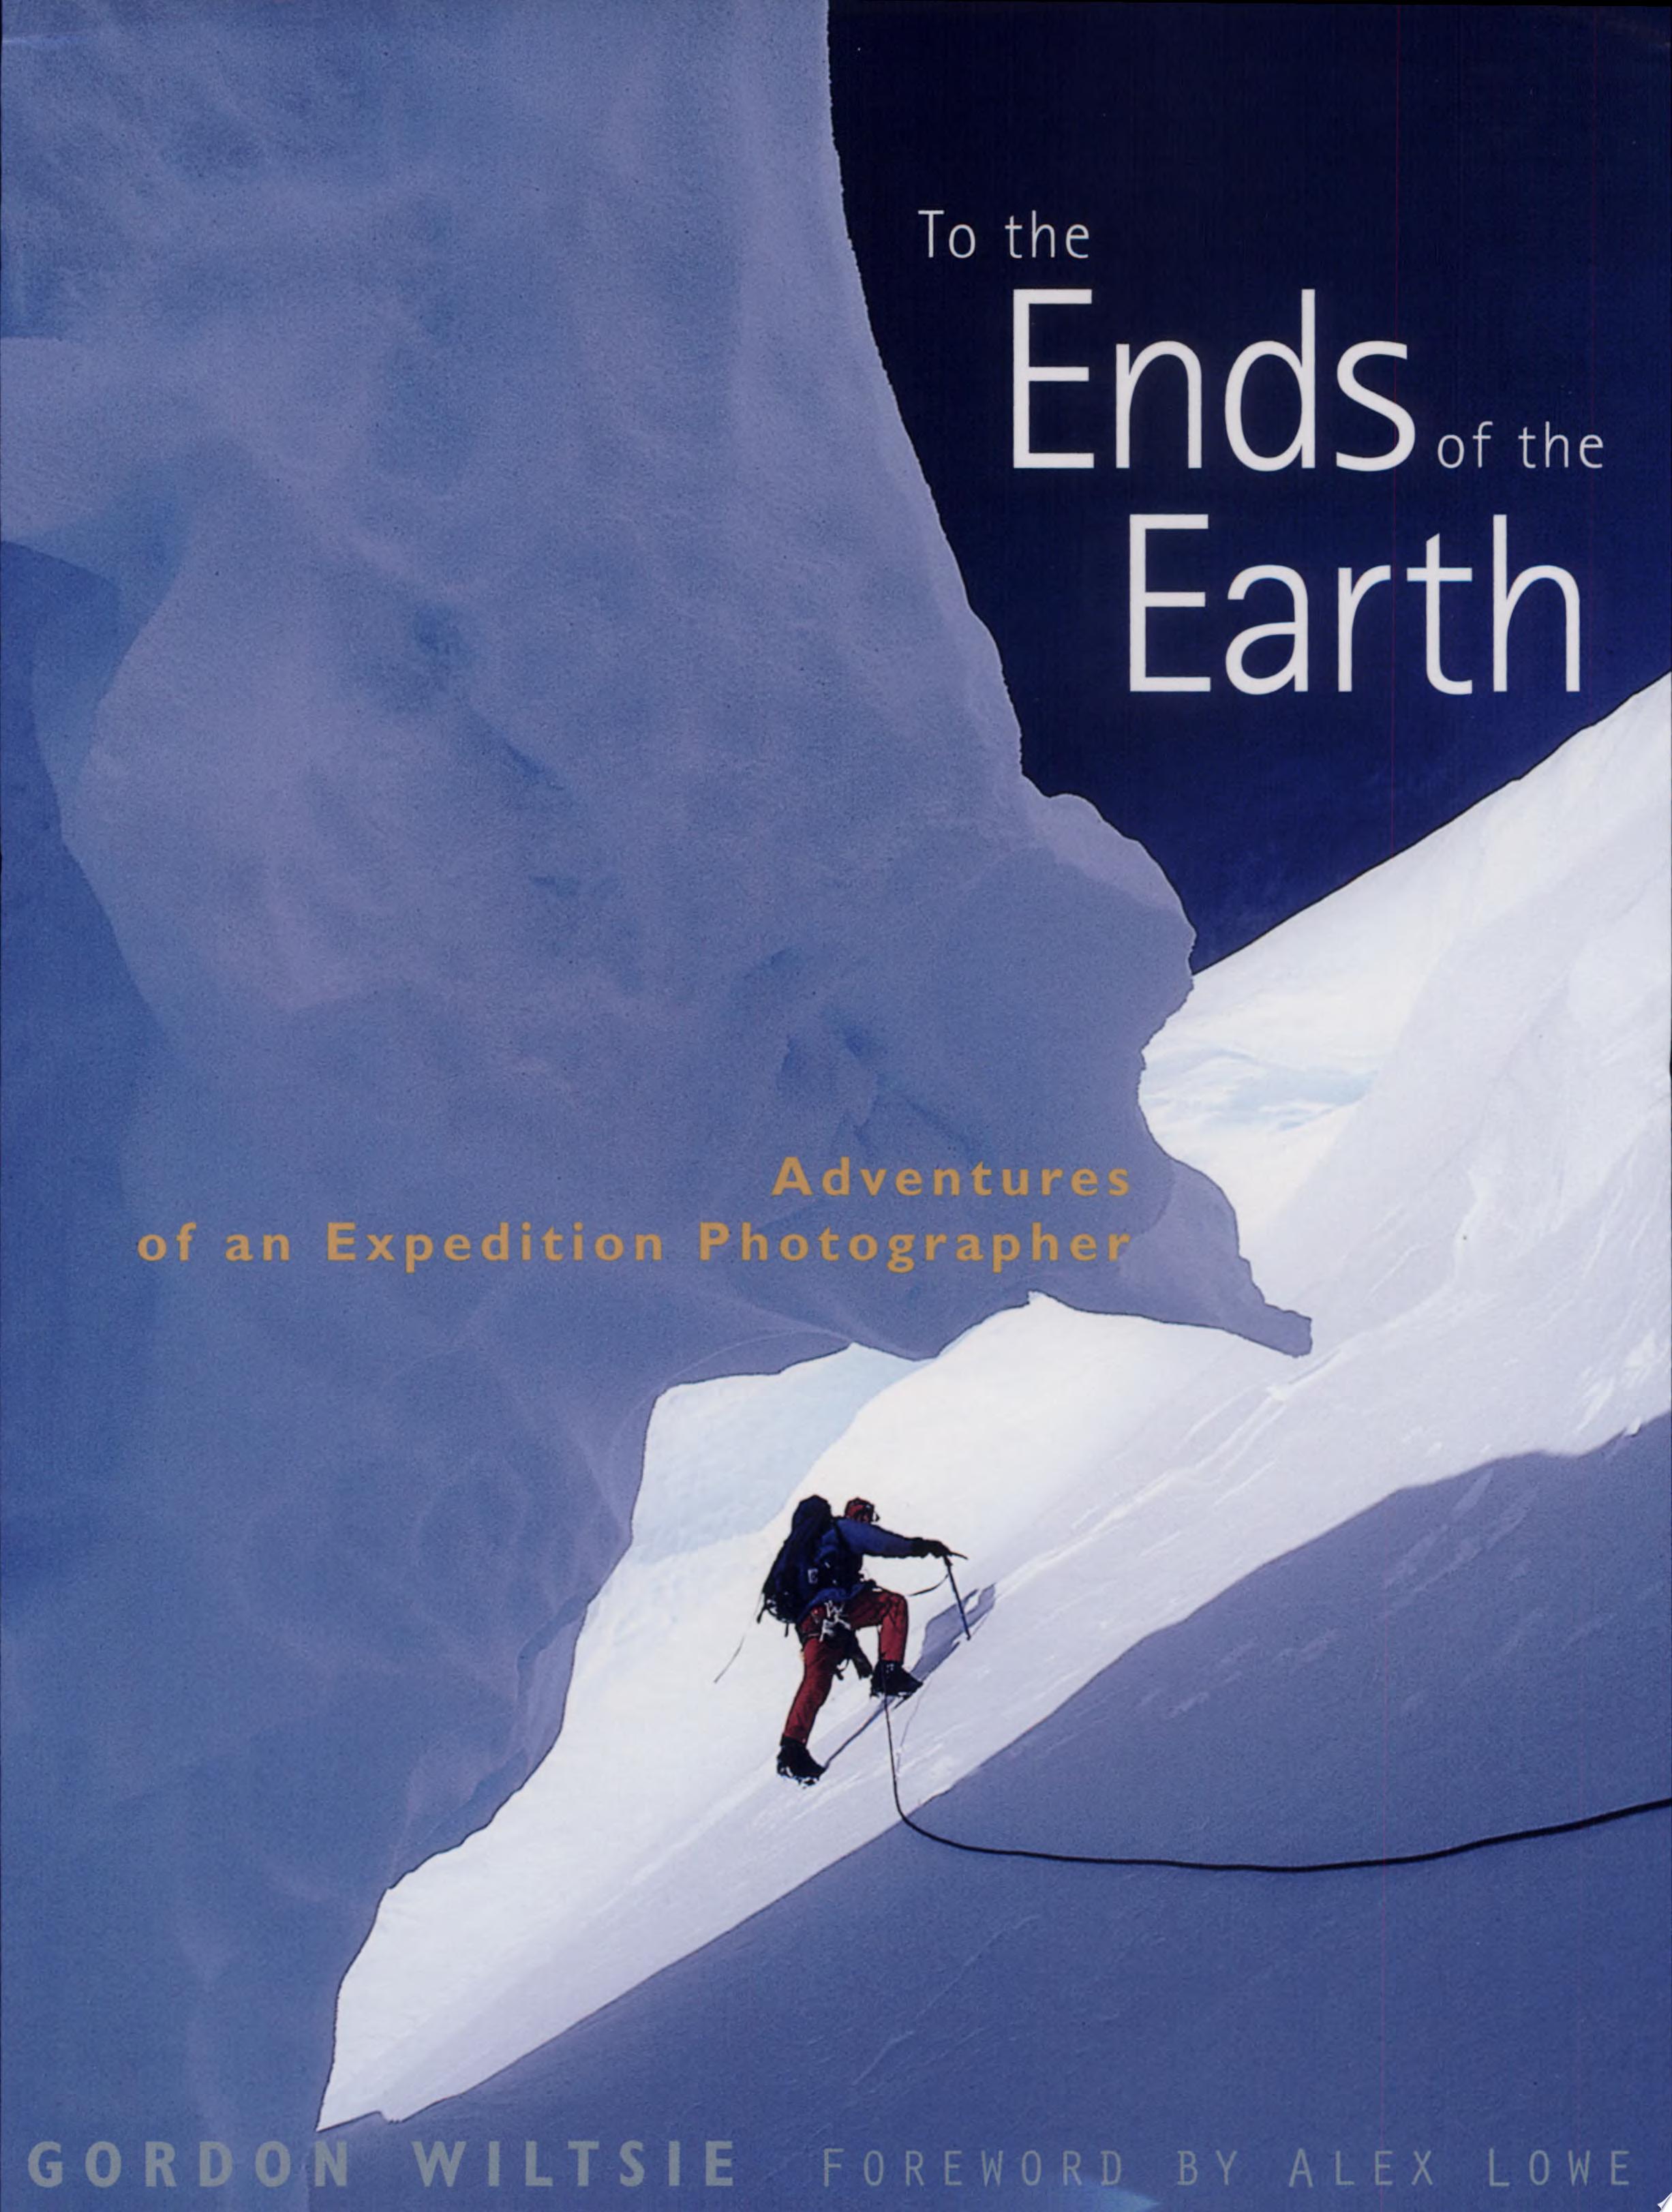 Image for "To the Ends of the Earth"